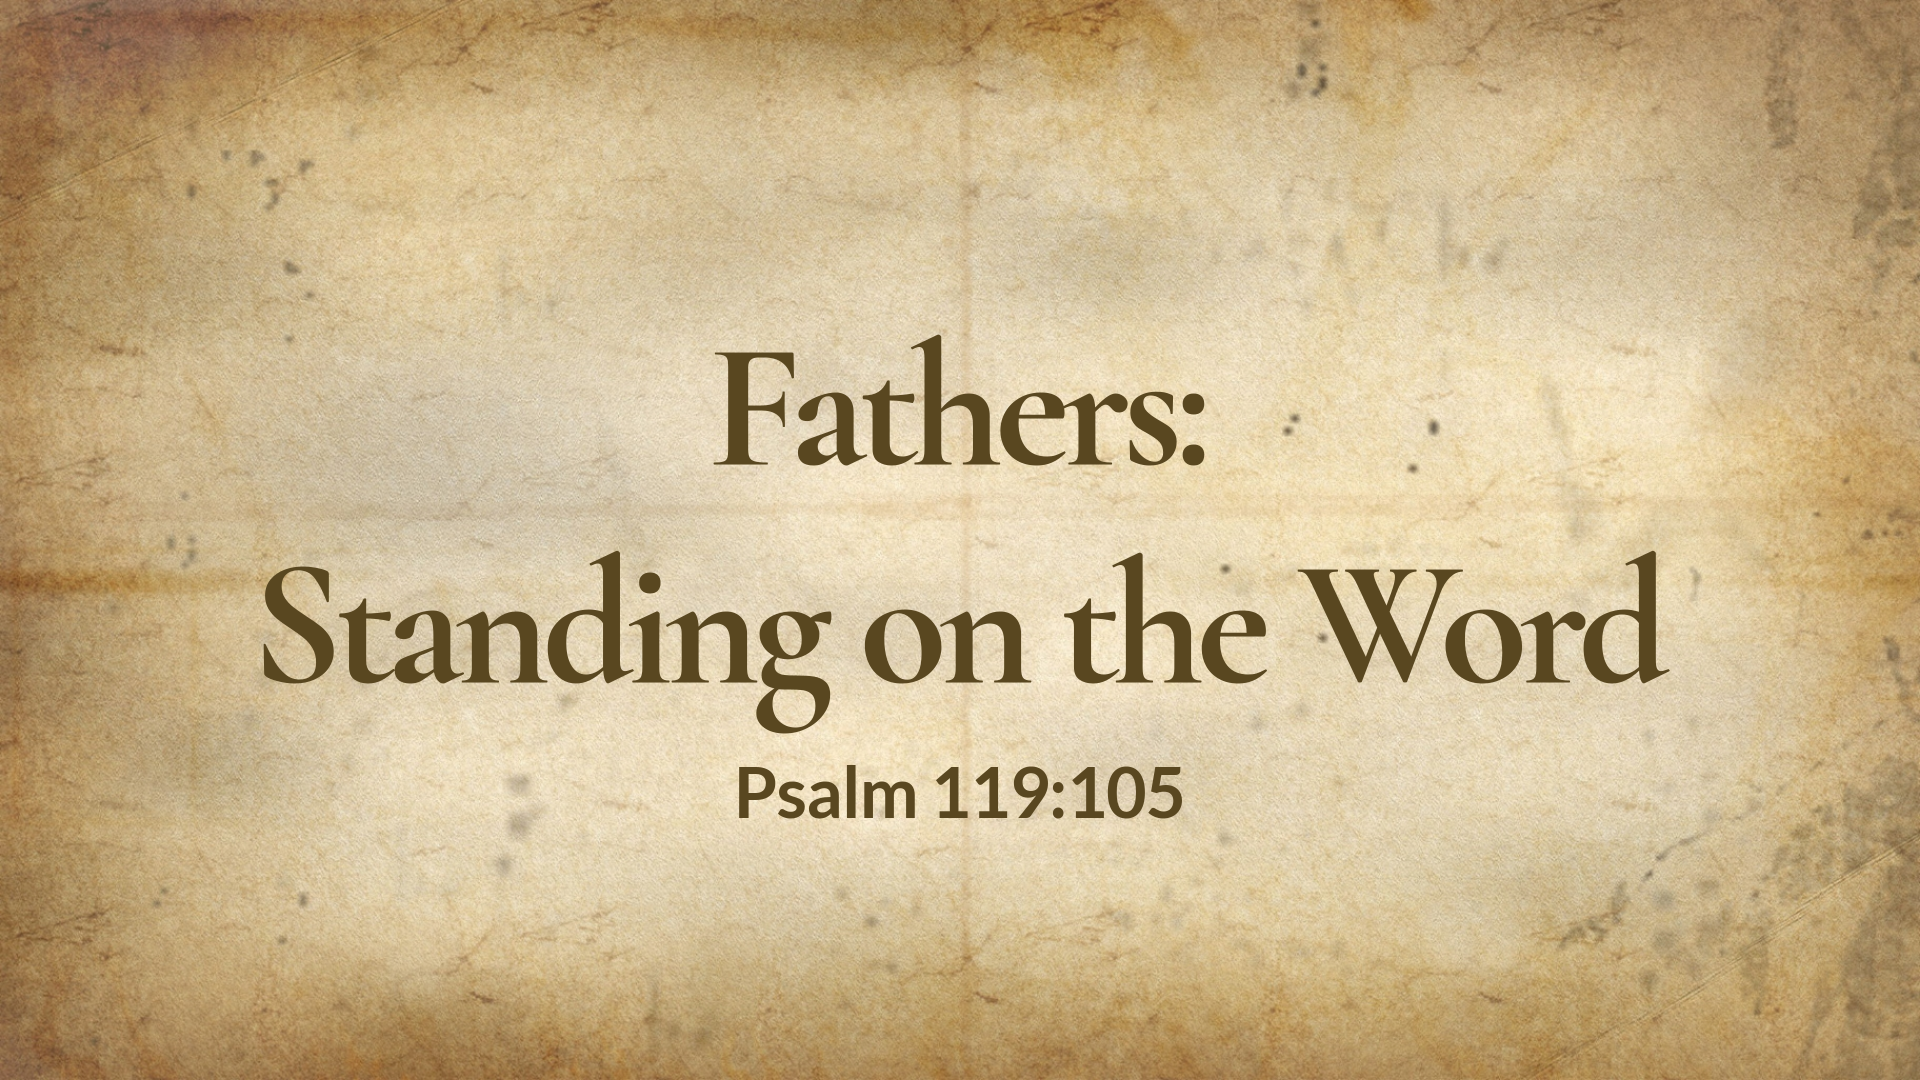 Fathers: Standing on the Word